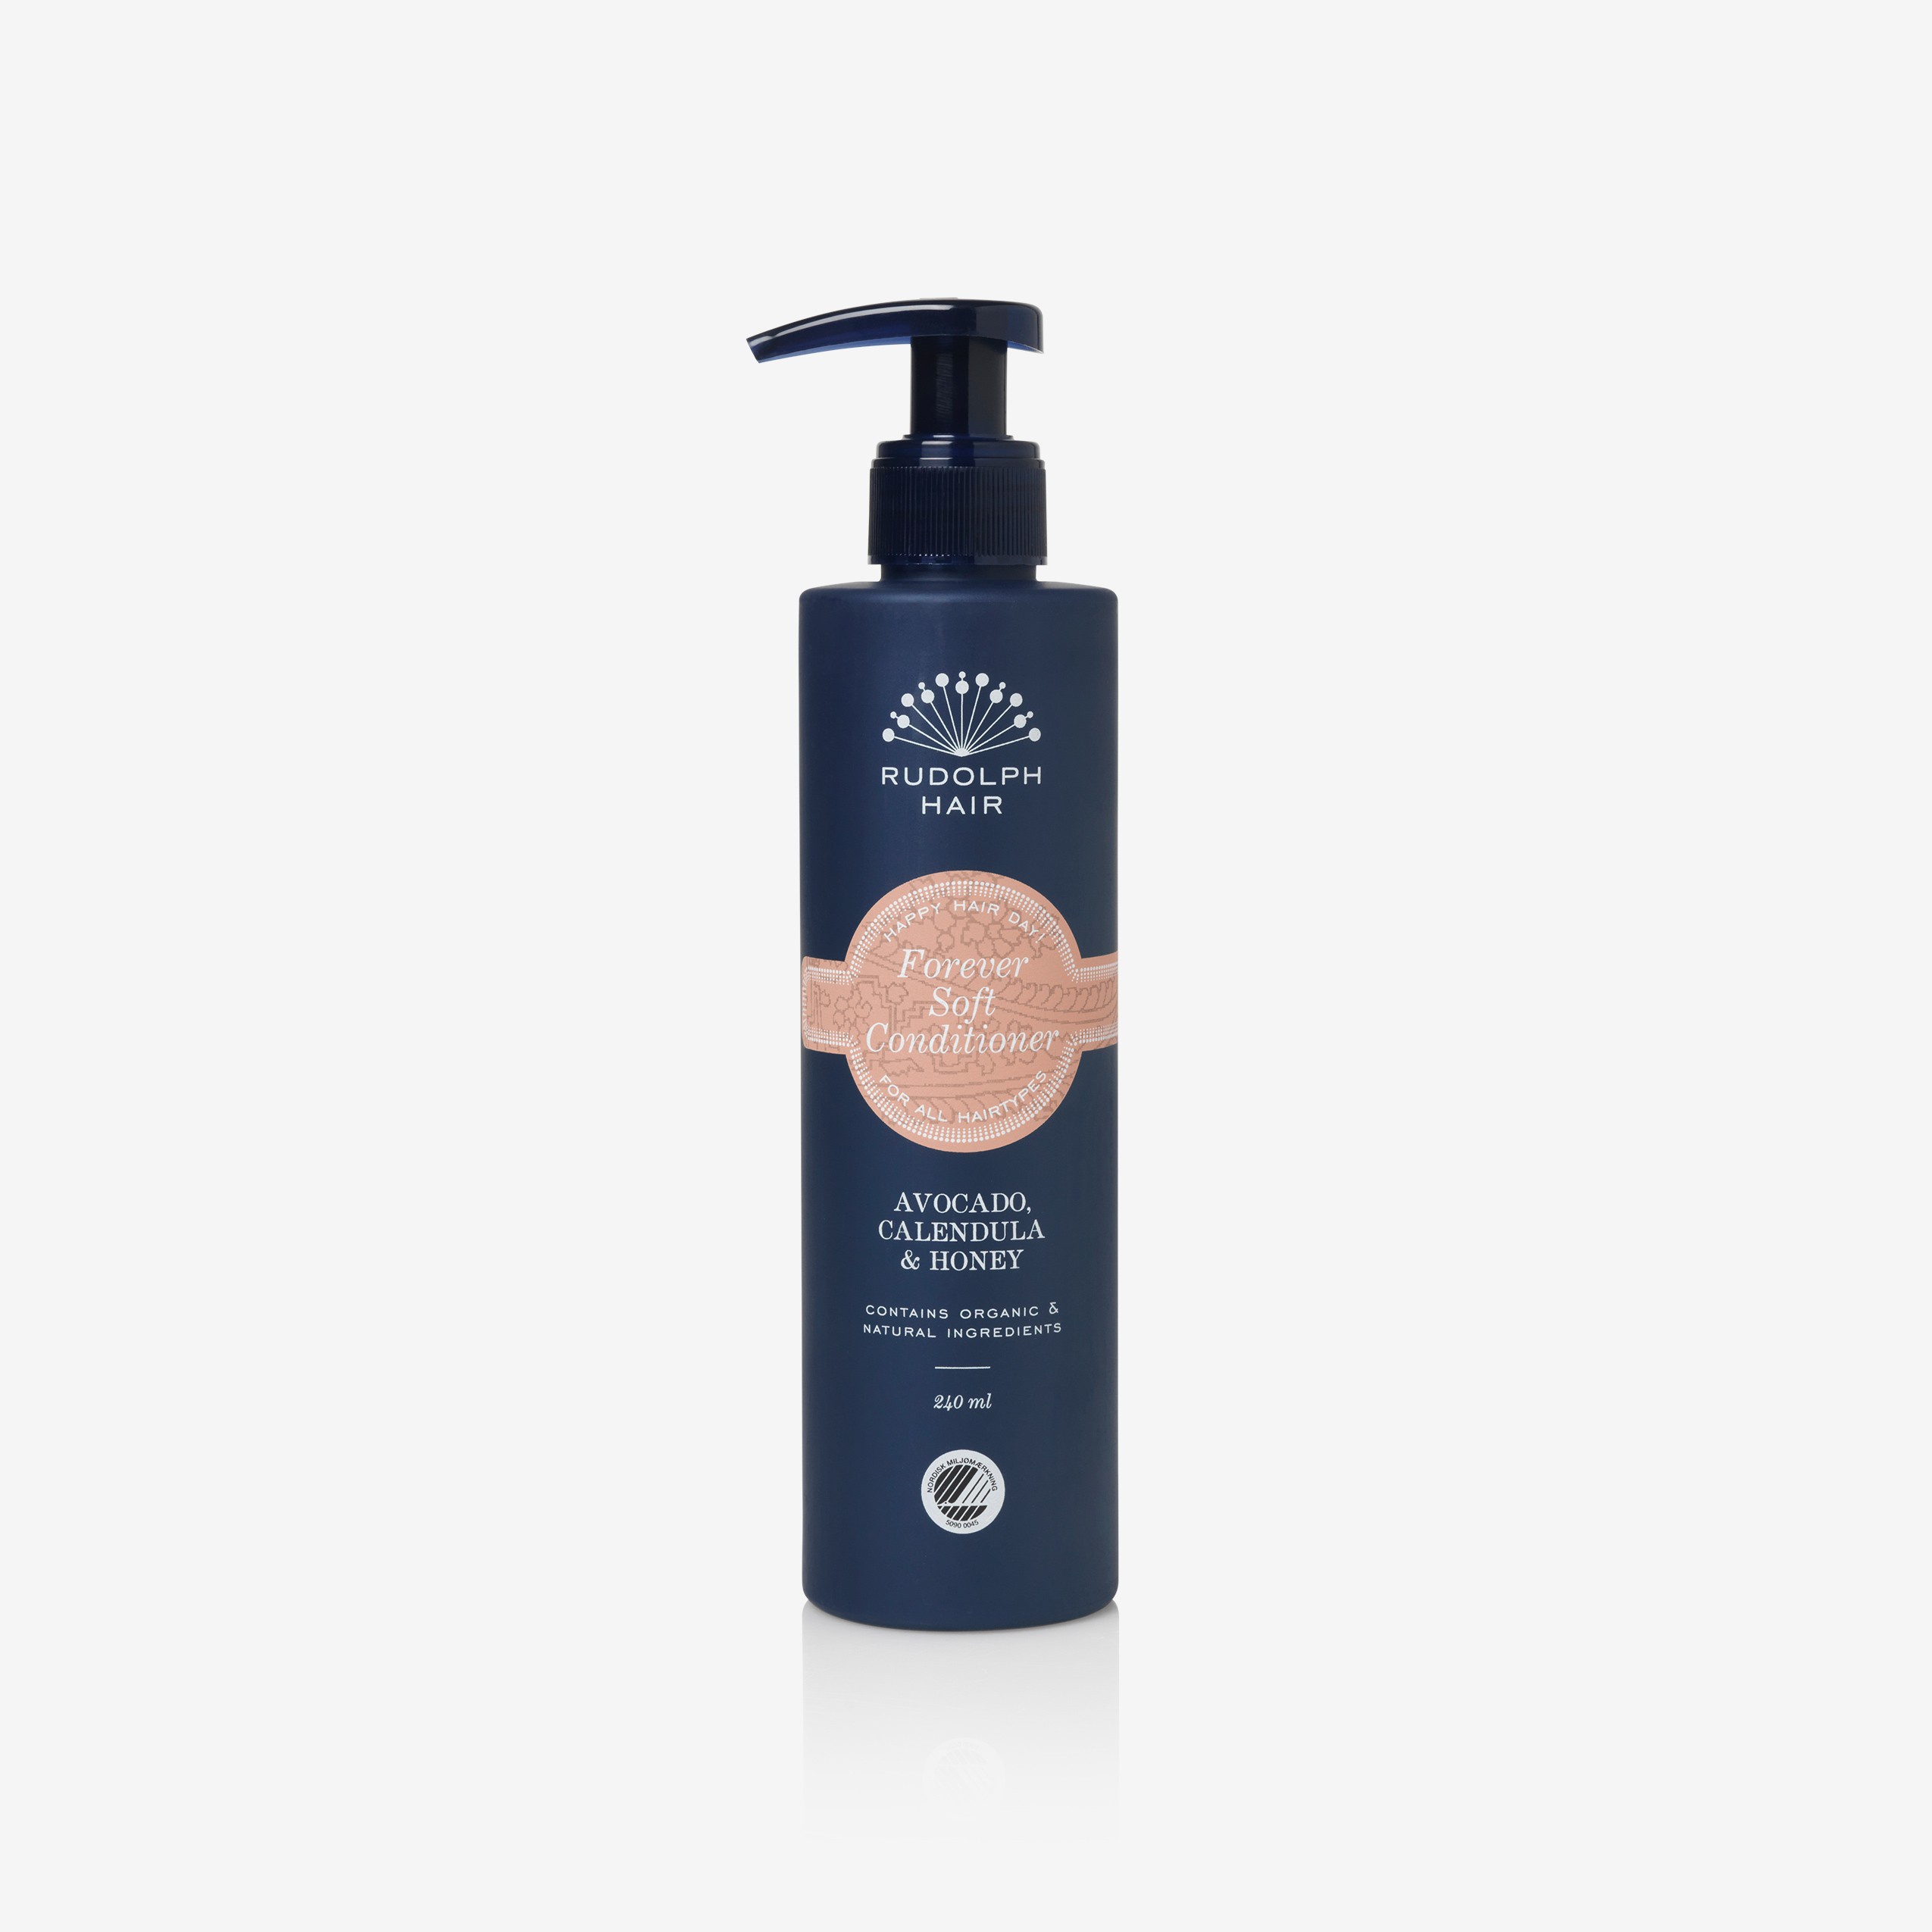 Rudolph Care Forever Soft Conditioner